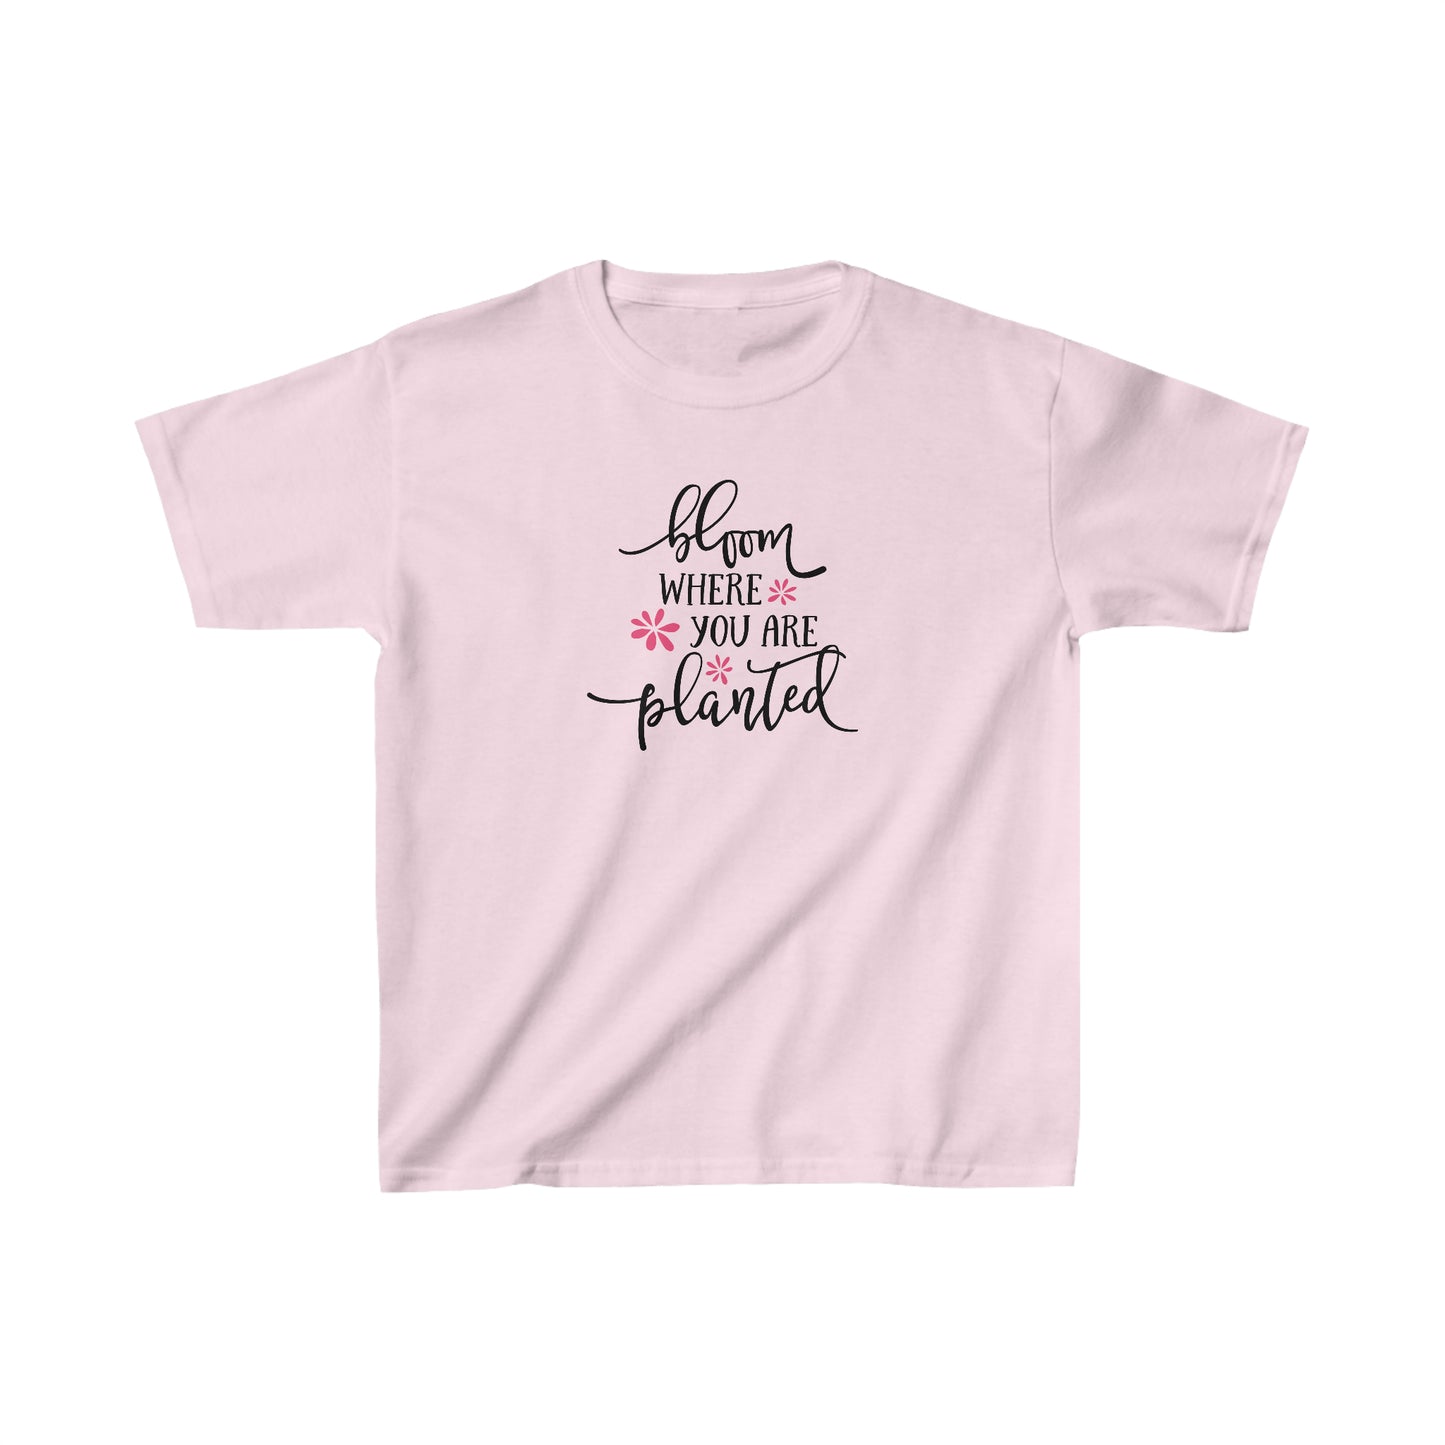 Bloom where you are planted - Kids Heavy Cotton Tee